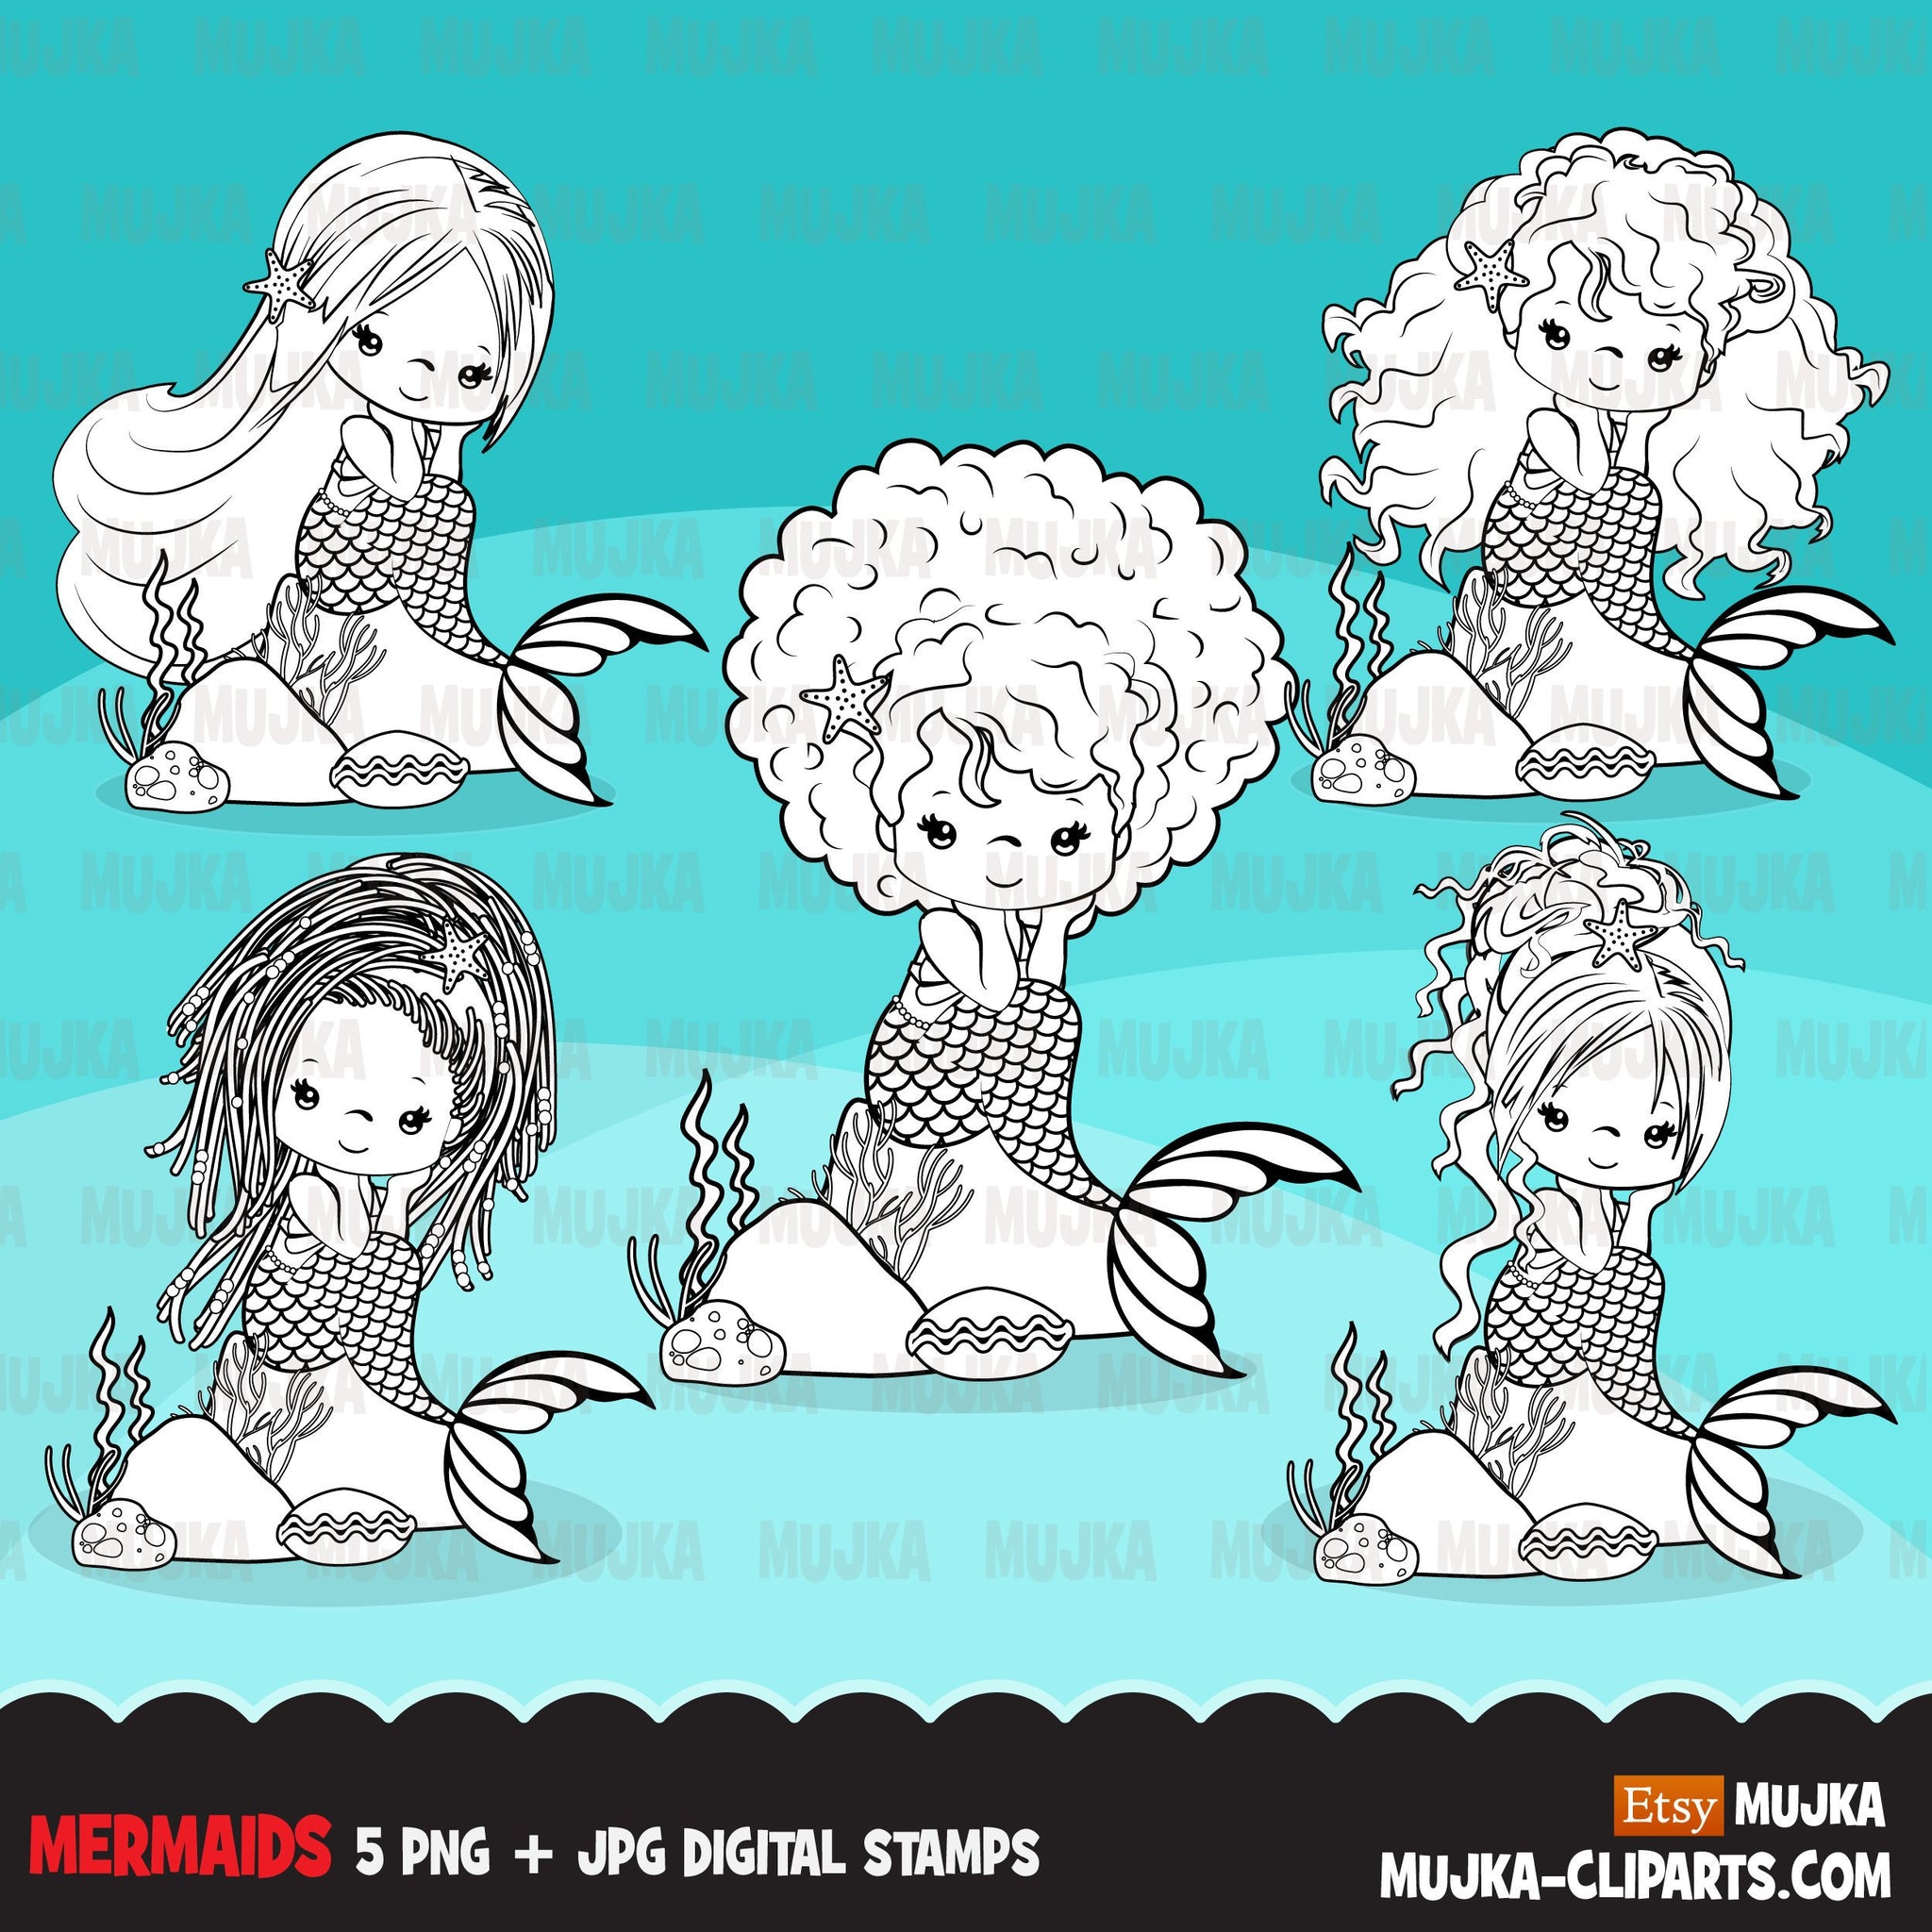 Mermaid Digital stamps, afro mermaid princess, birthday party, coloring page, favors, toppers, clip art B&W clip art outline